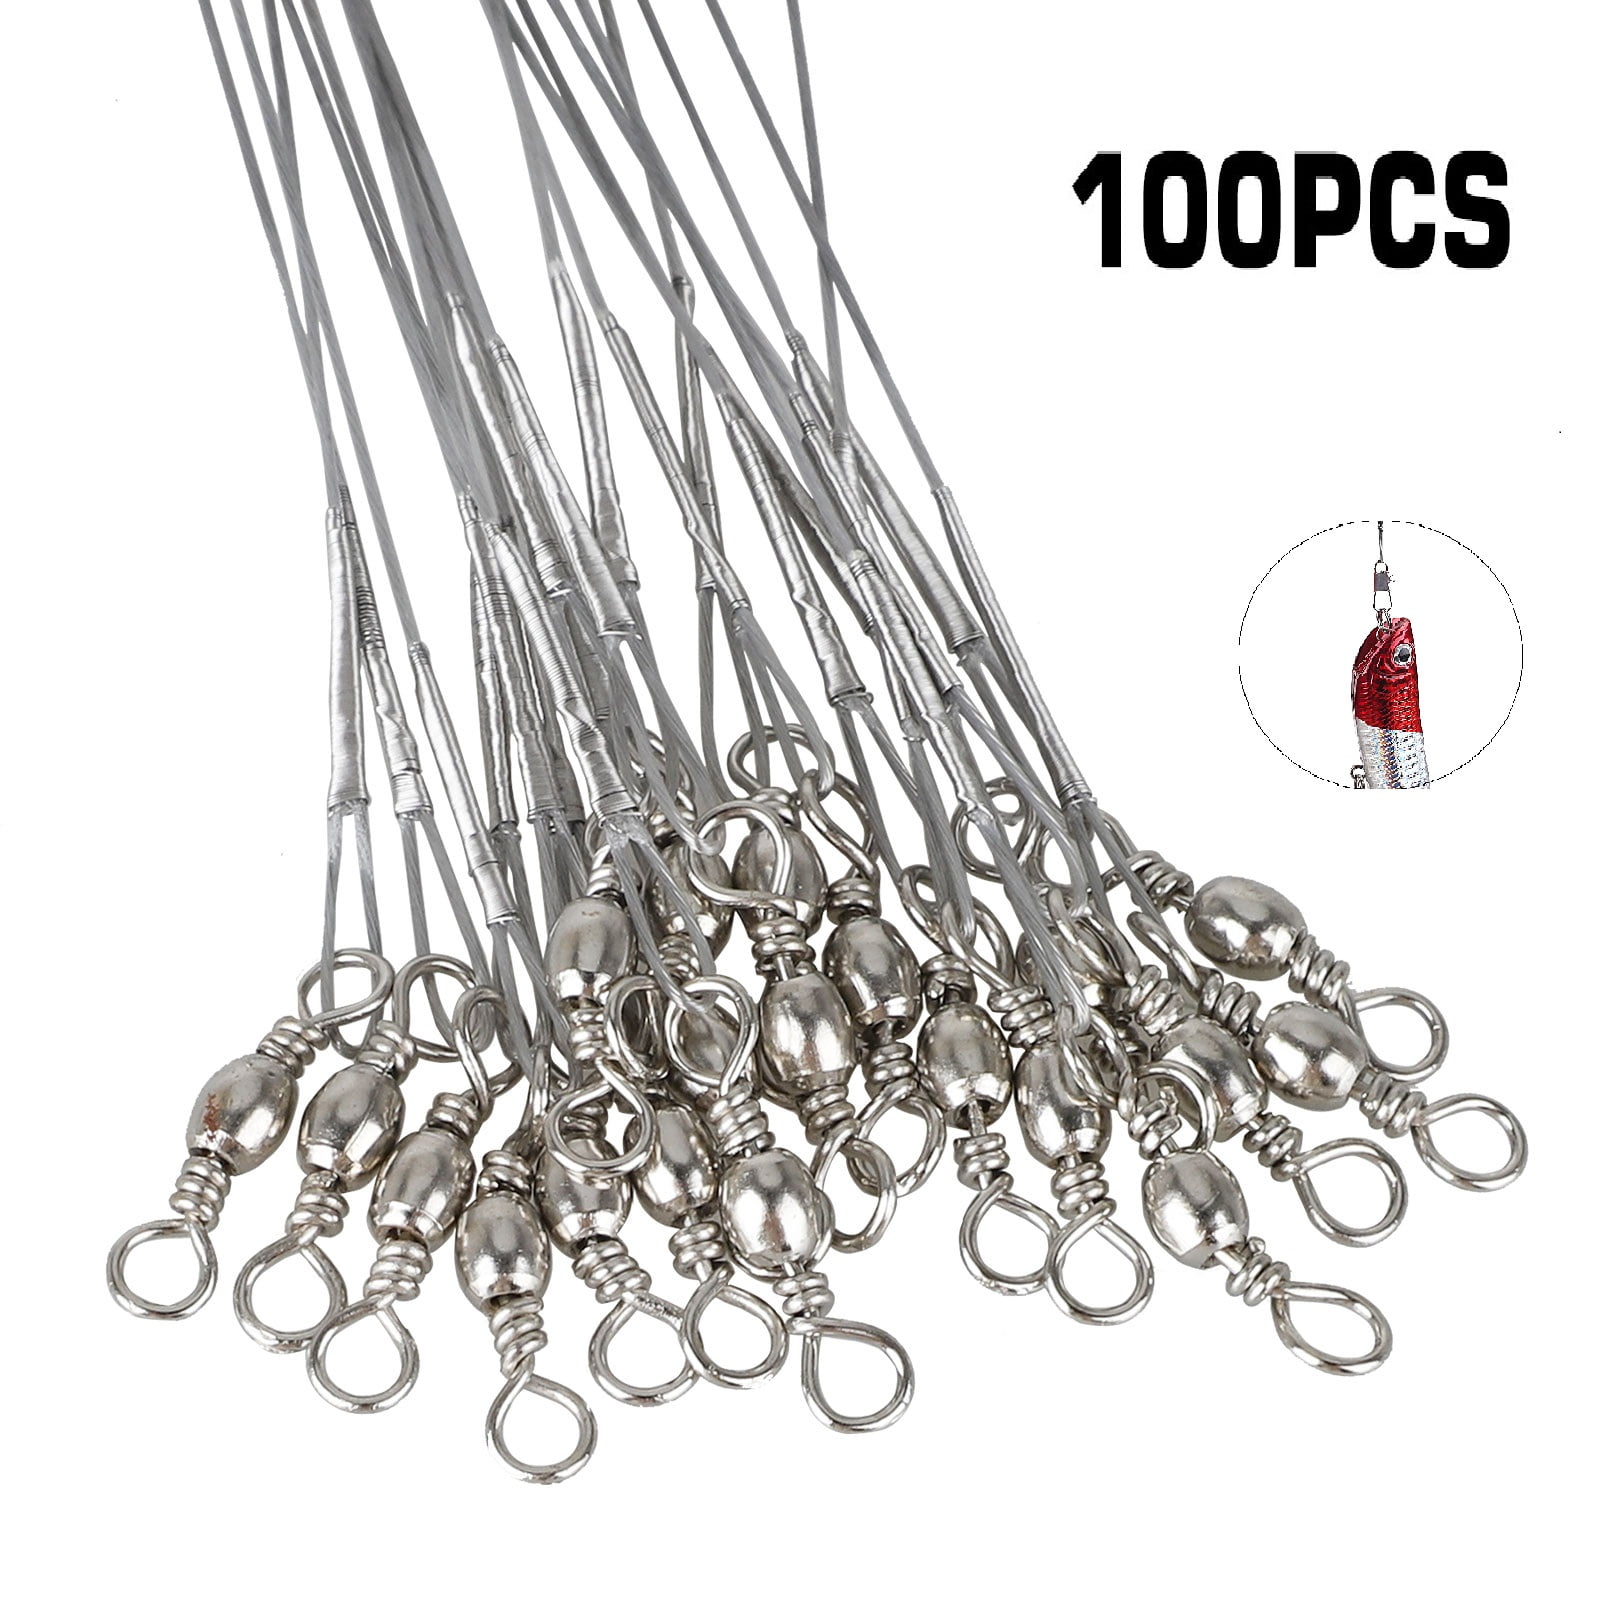 MOBOREST 60PCS Fishing Leaders, Hi-Low Rig Fish Line Stainless